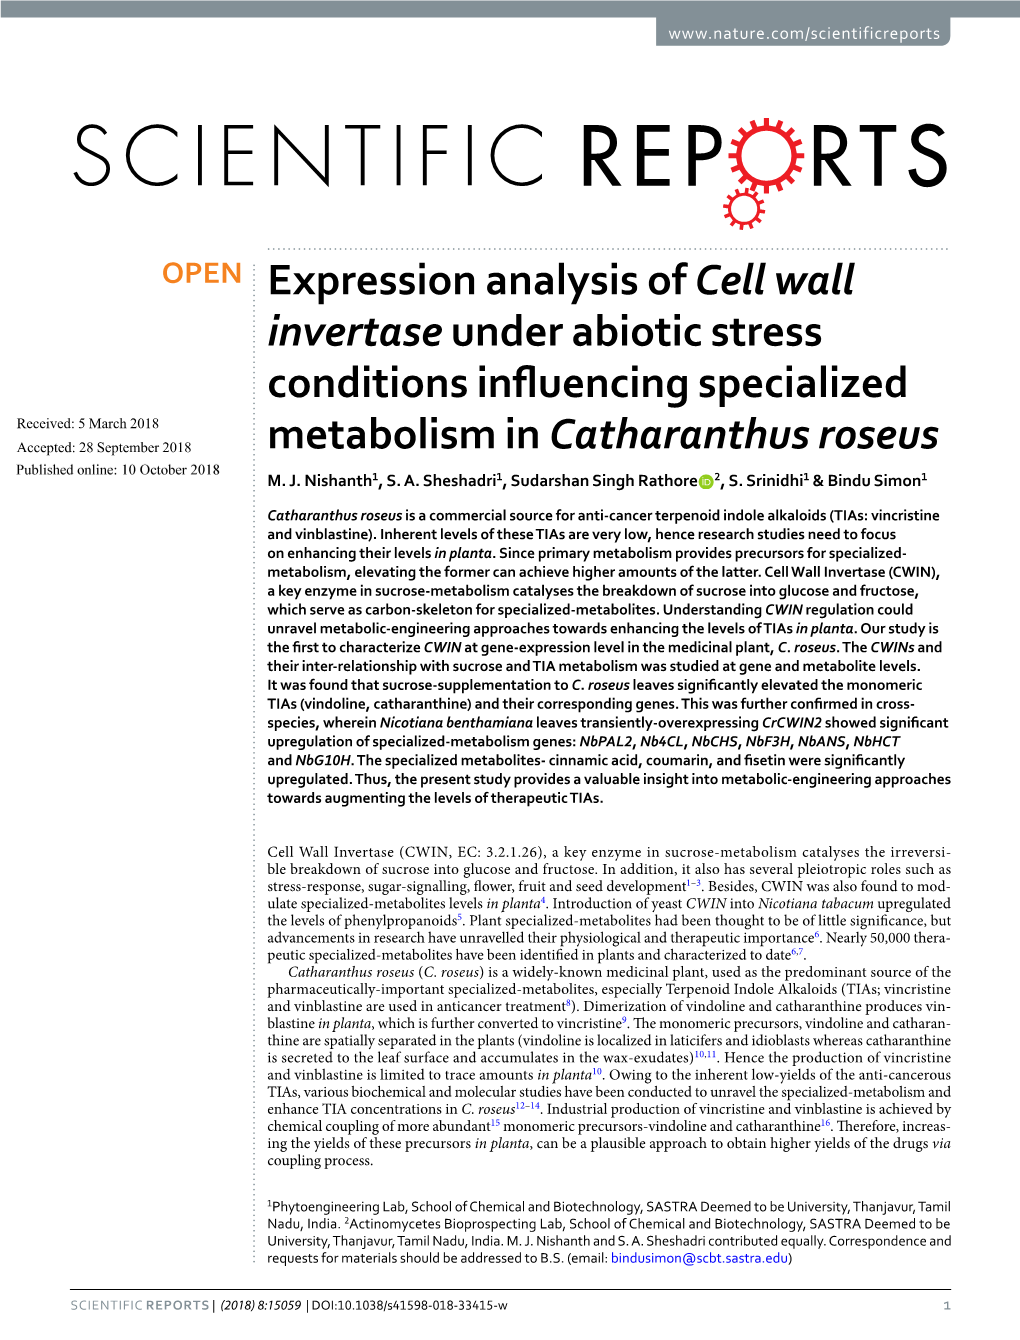 Expression Analysis of Cell Wall Invertase Under Abiotic Stress